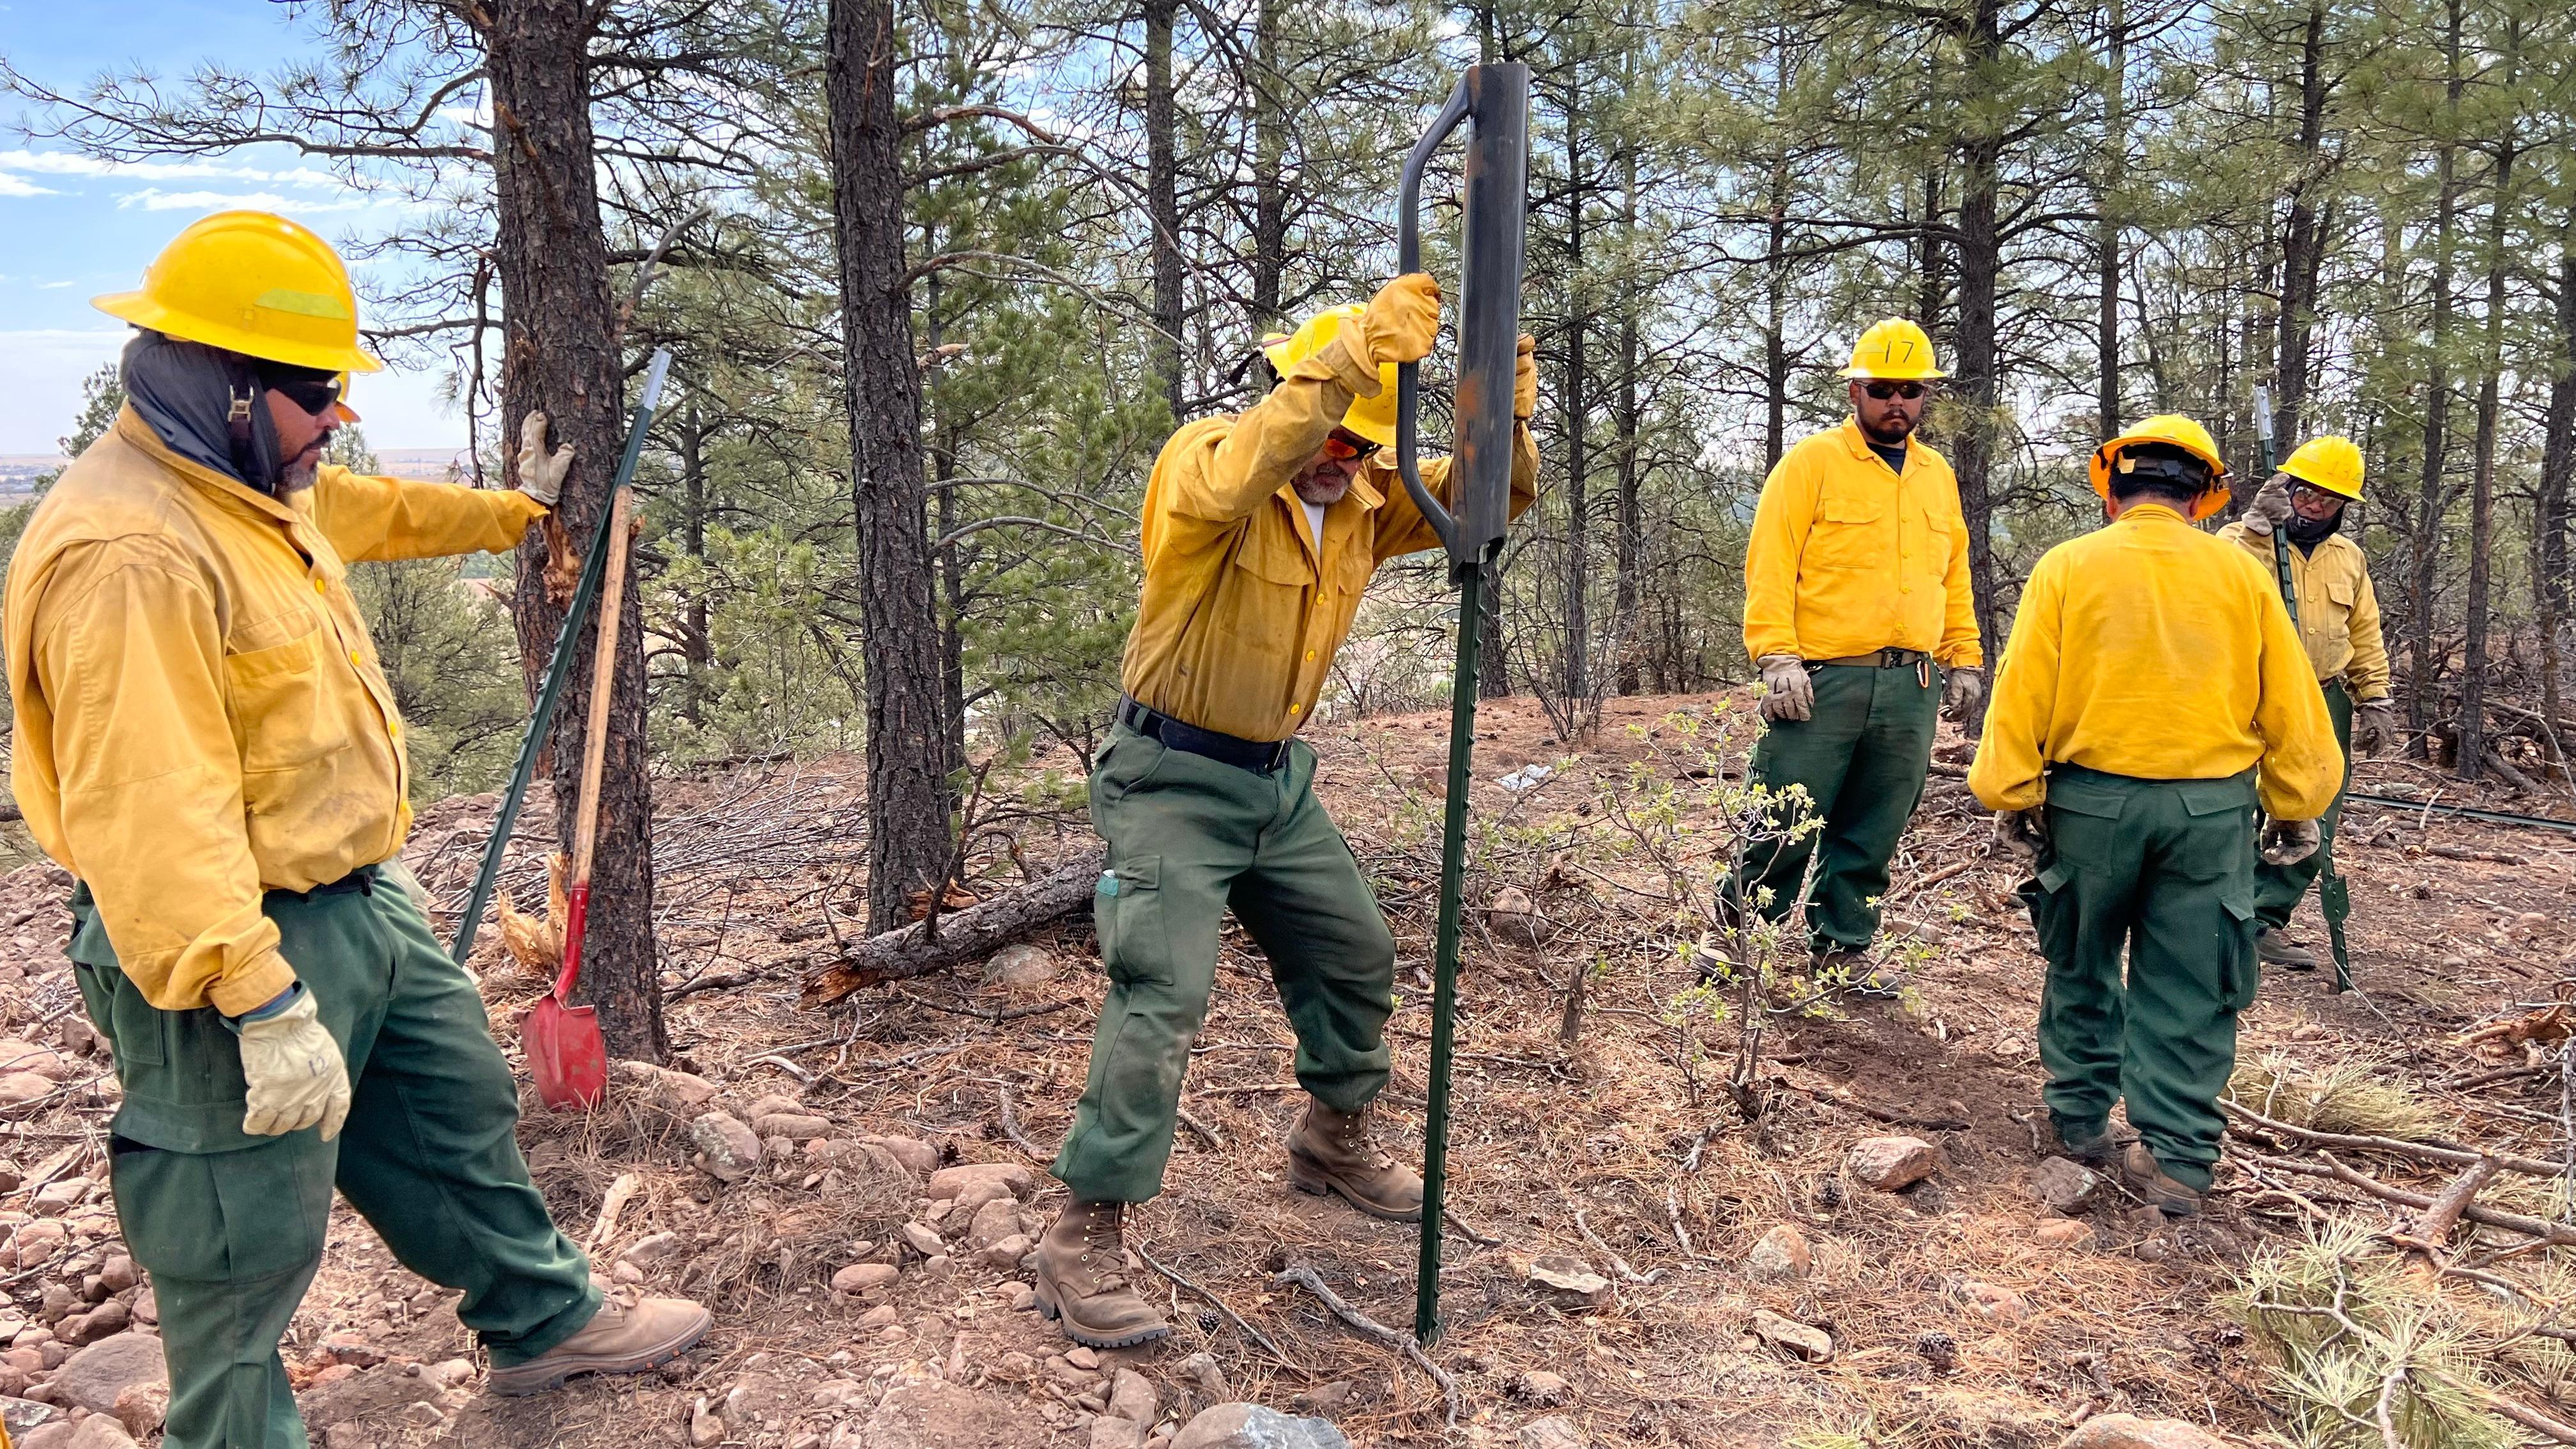 Five firefighters in yellow shirts and green pants pound t-posts into the ground in a pine forest.